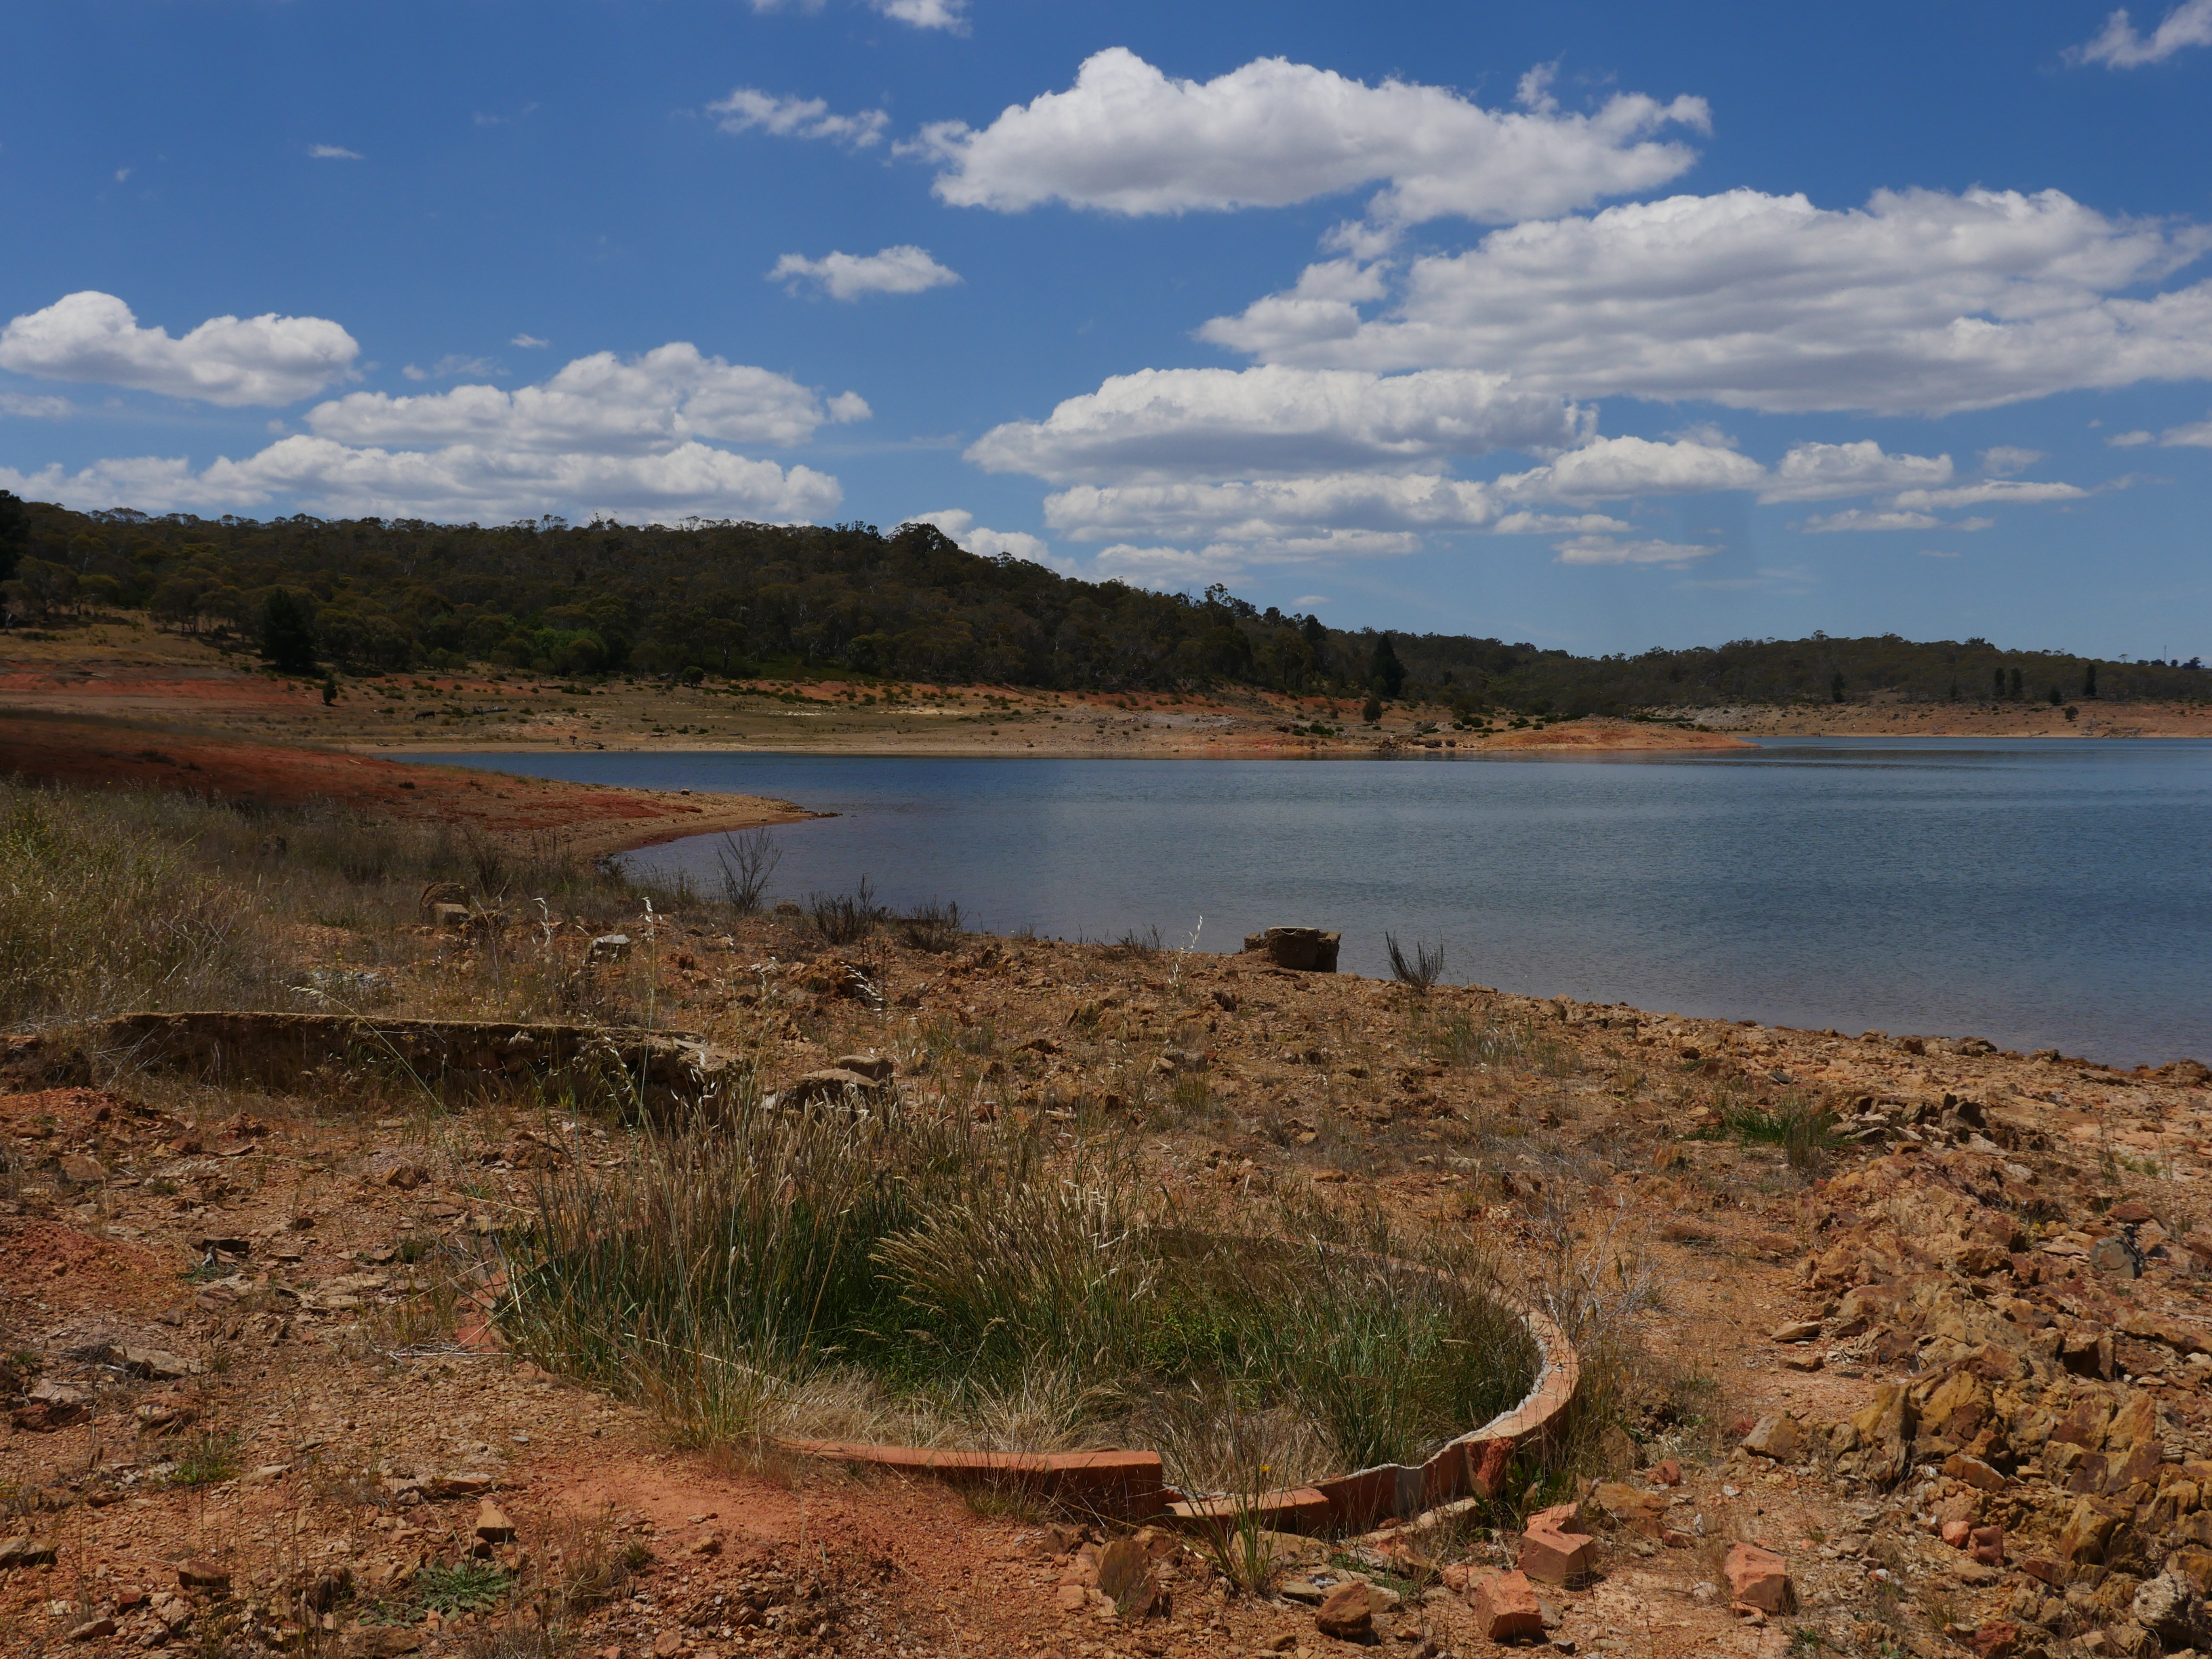 Photograph showing the remains of the original township of Adaminaby next to Lake Eucumbene.